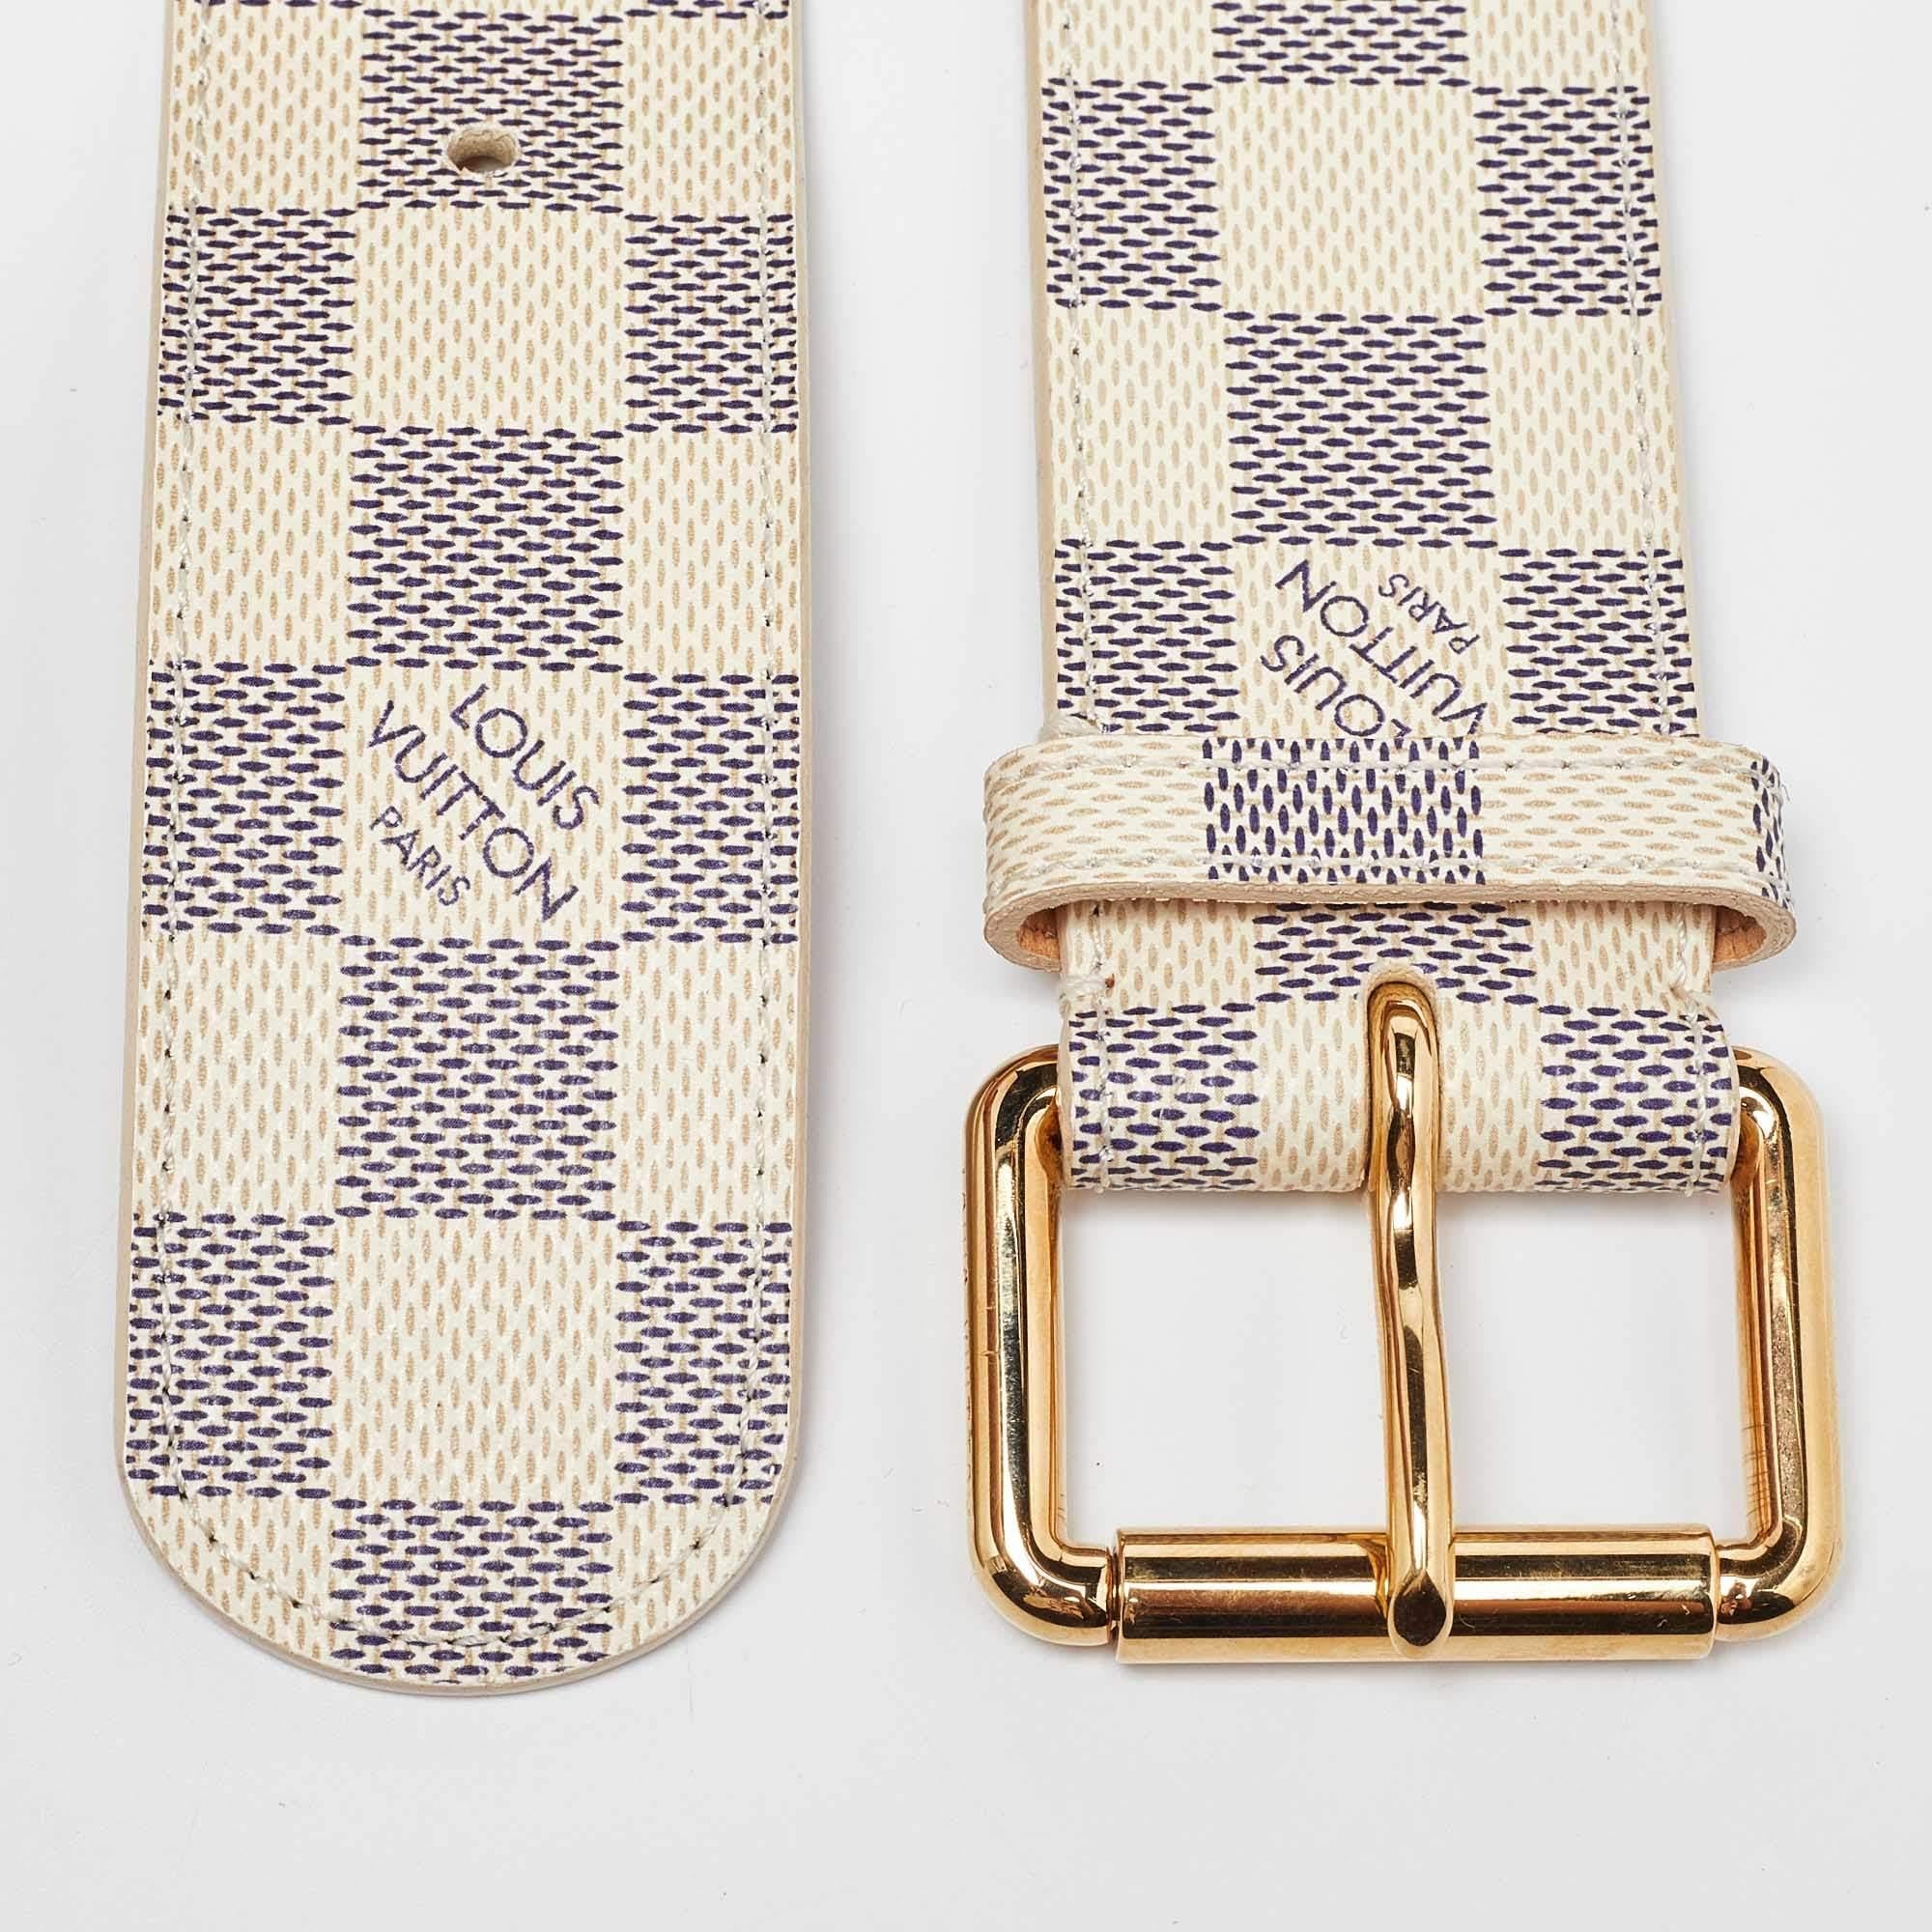 This versatile, elegant belt in Louis Vuitton's iconic Monogram canvas has a gold-tone buckle. The belt is crafted of Damier Azur canvas coated and makes for a prized possession.

